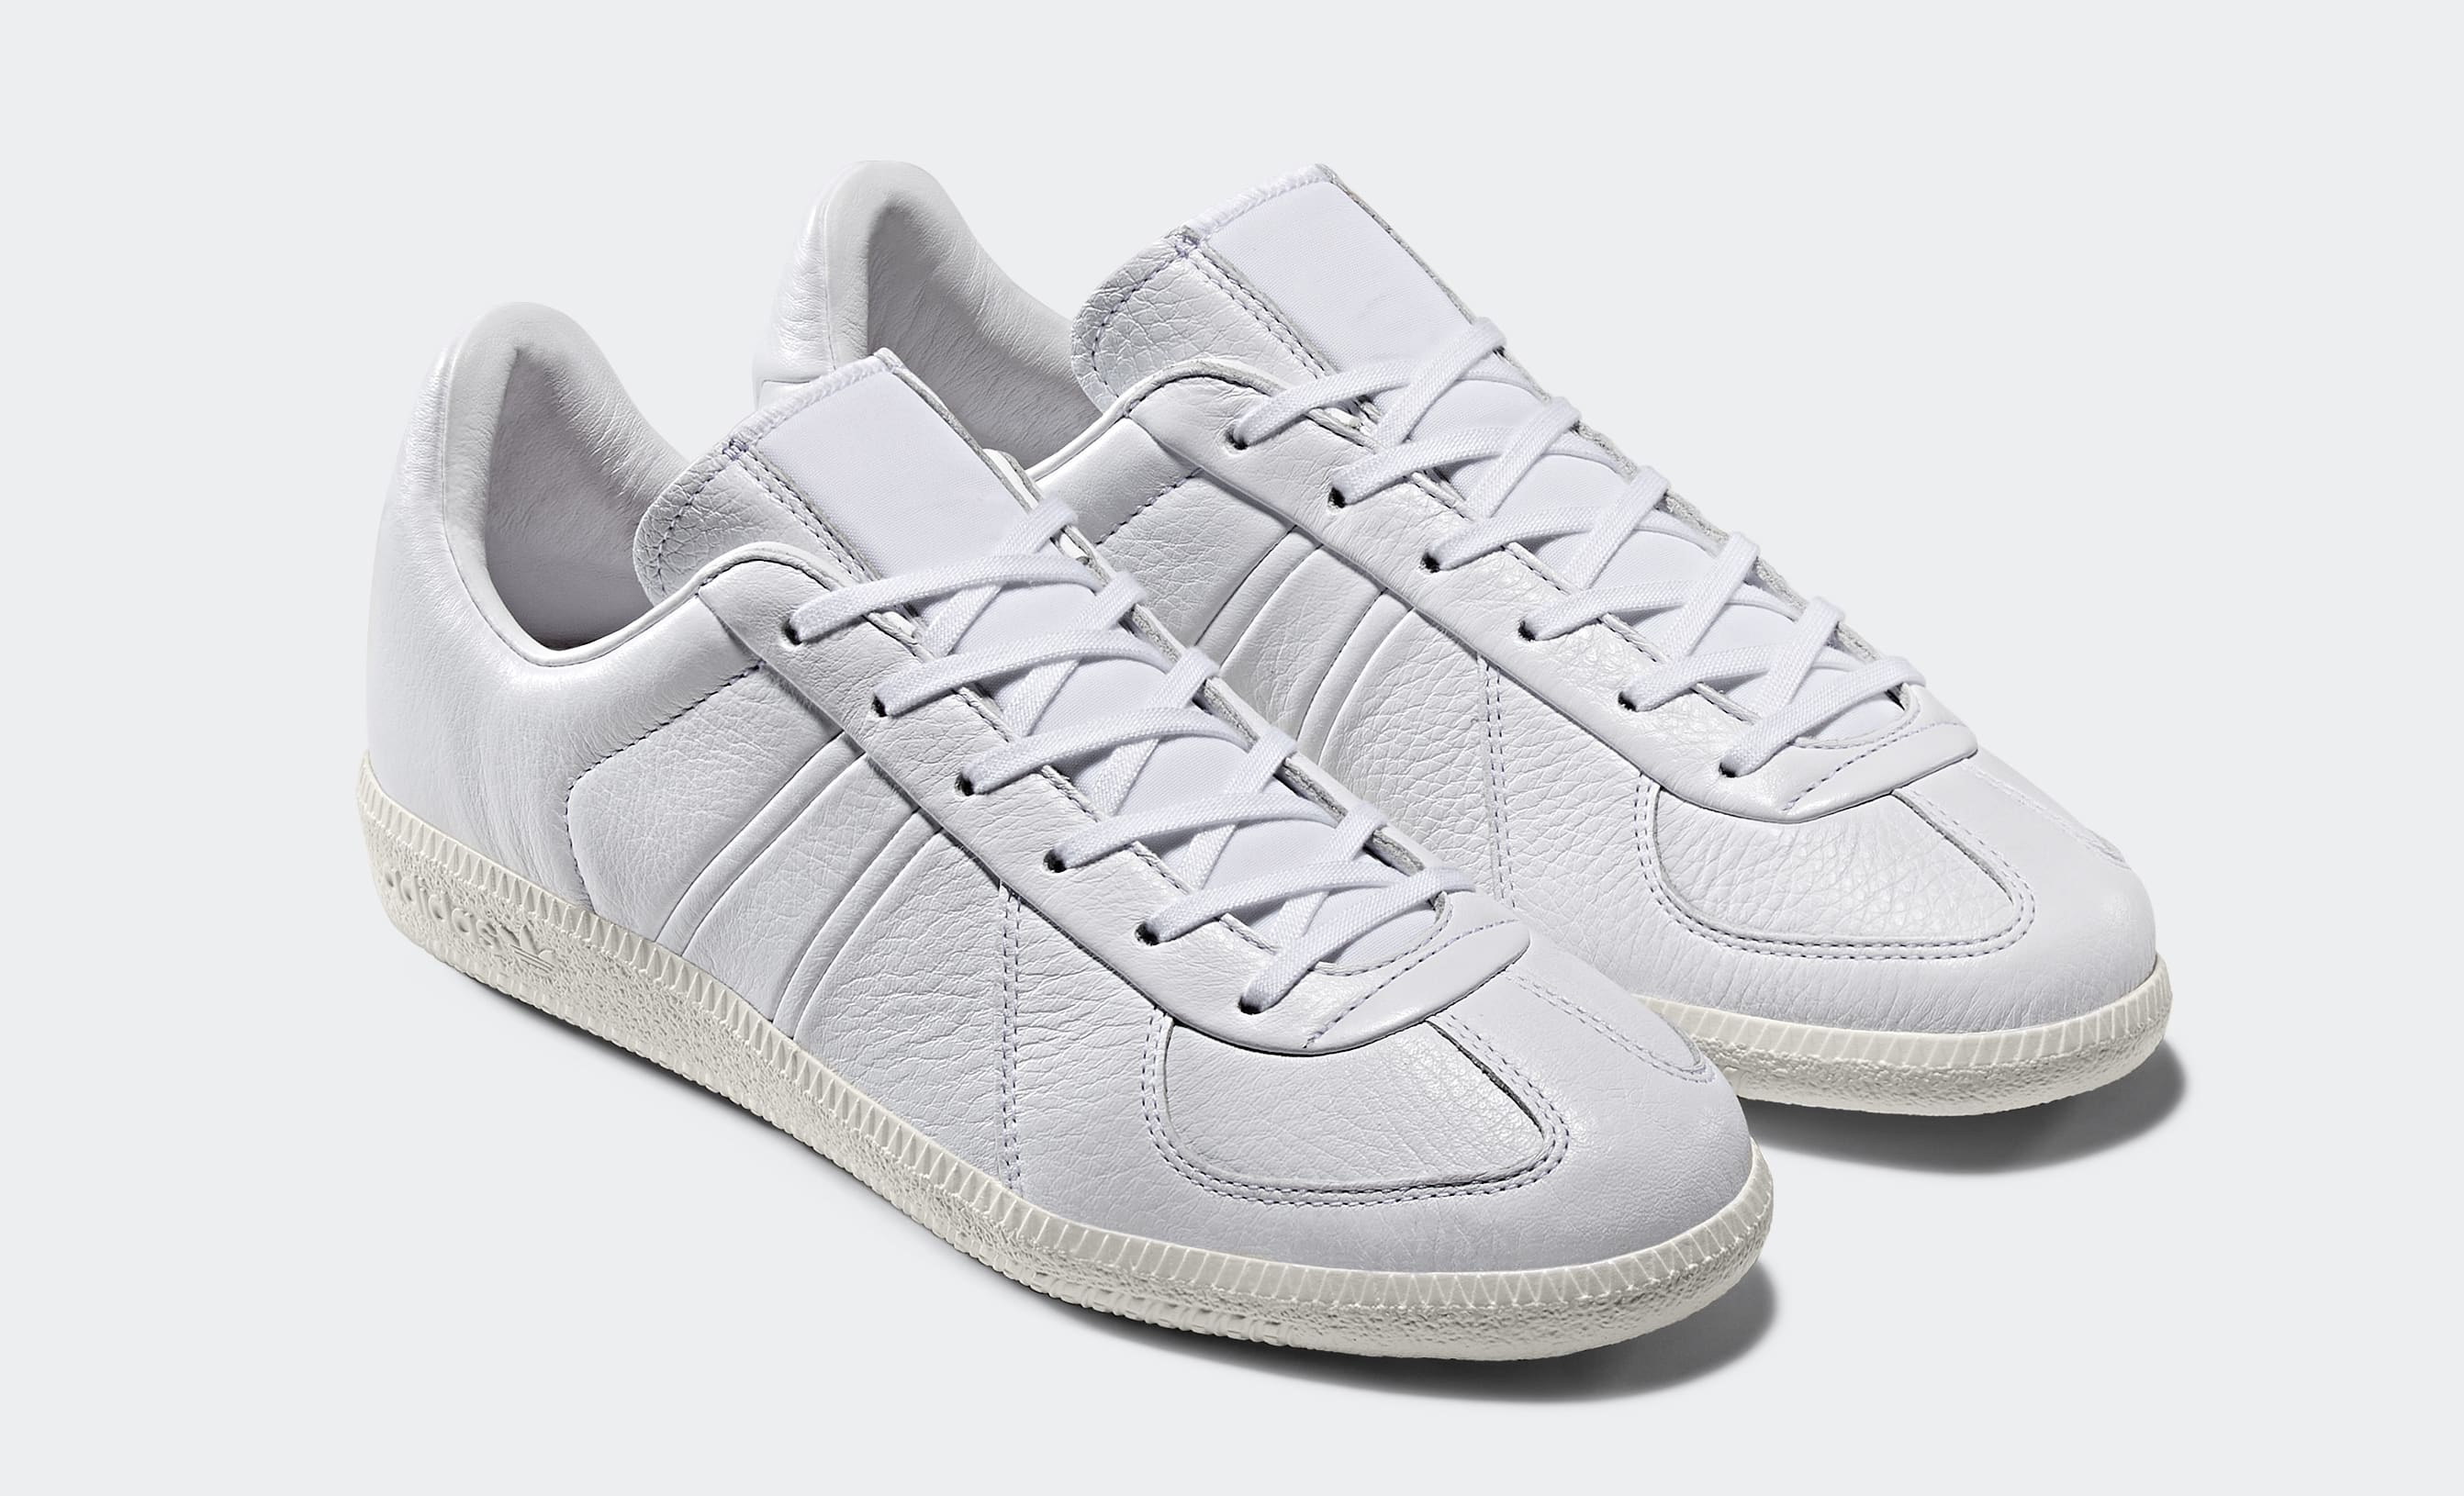 oyster-holdings-adidas-bw-army-bc0545-pair